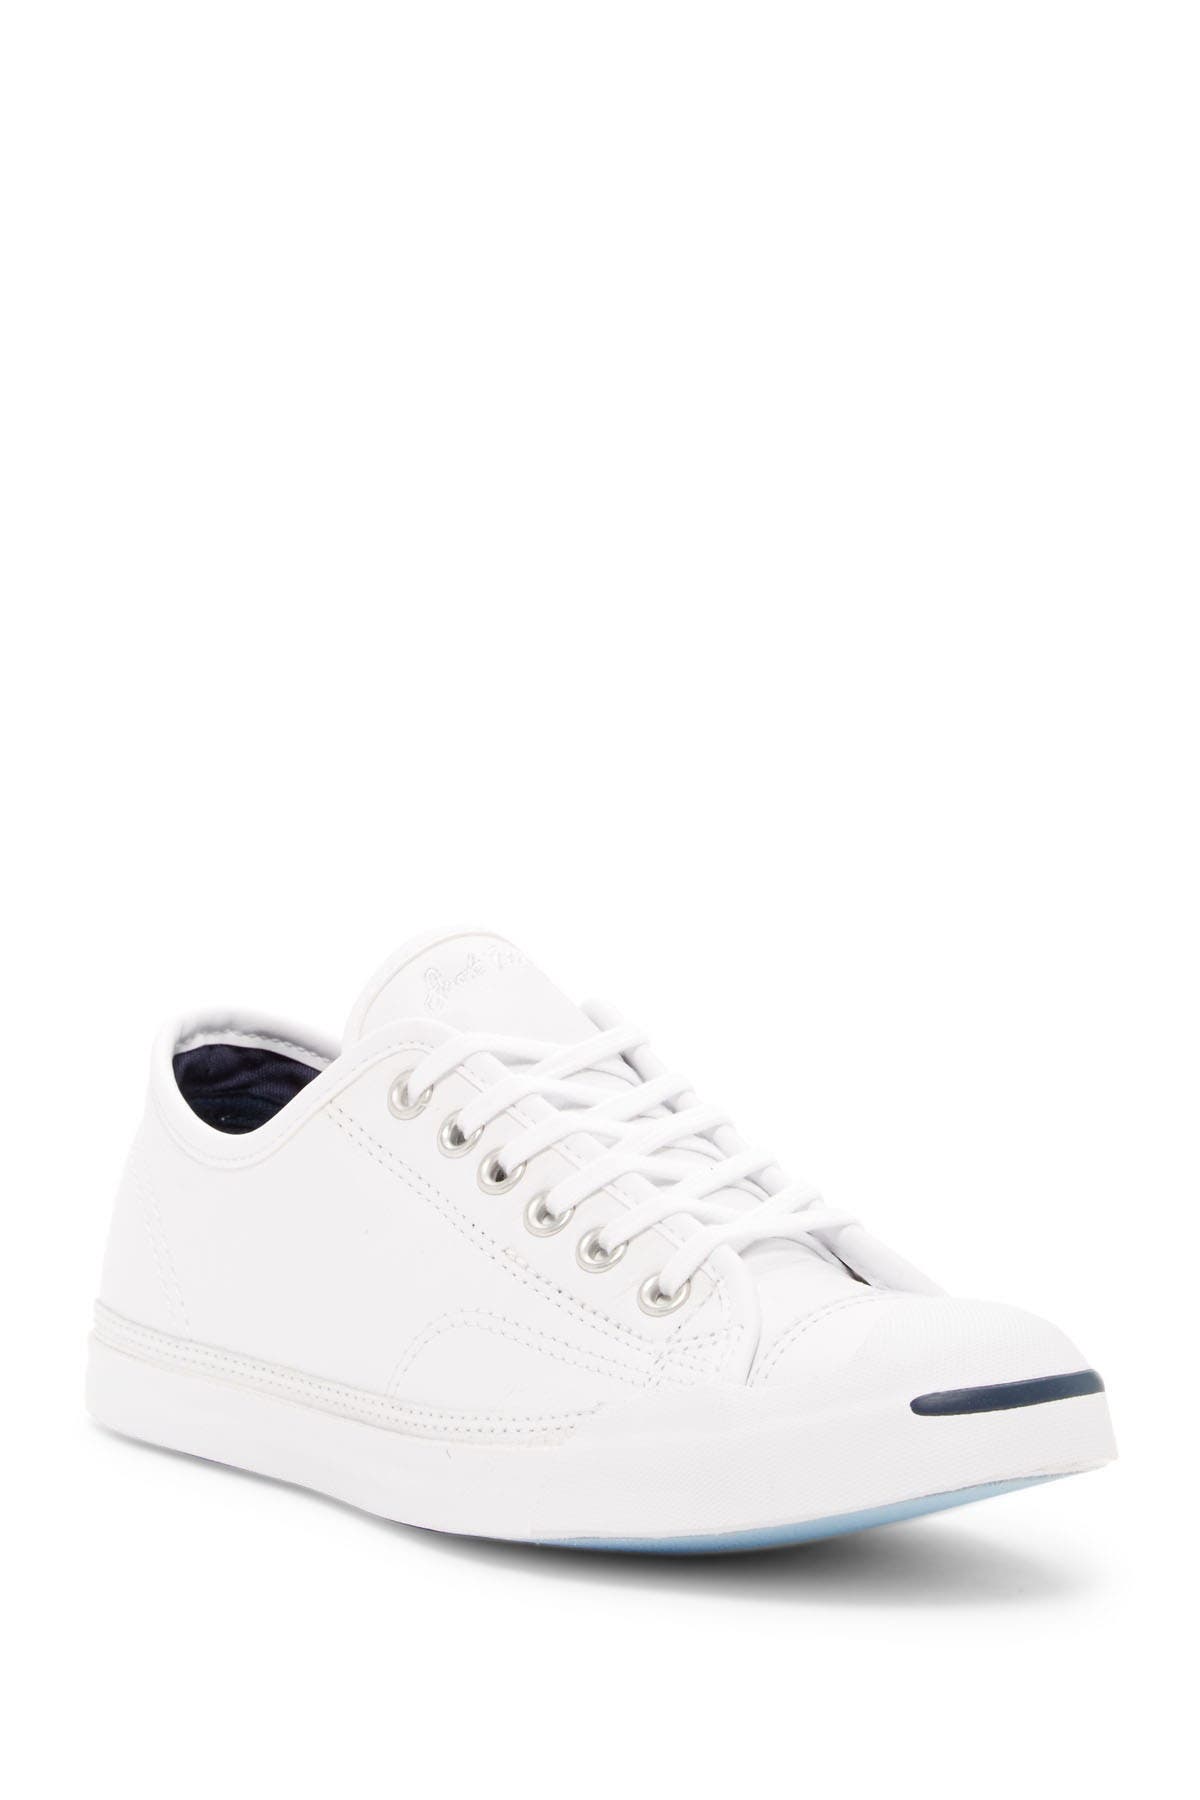 Converse | Jack Purcell Ox Low Top 